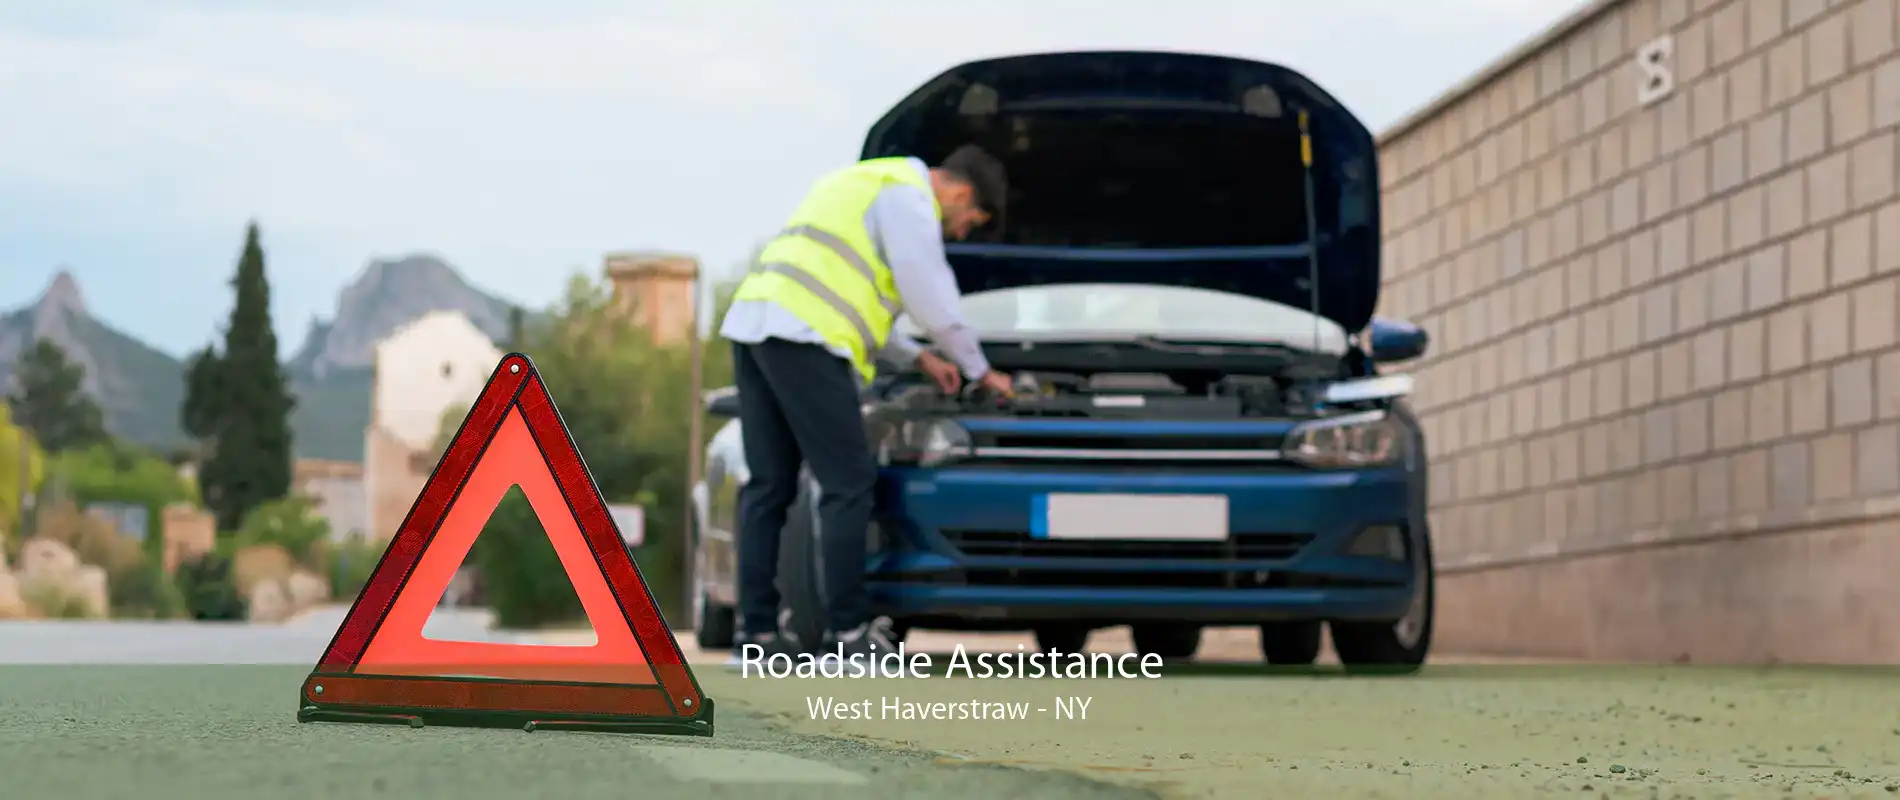 Roadside Assistance West Haverstraw - NY